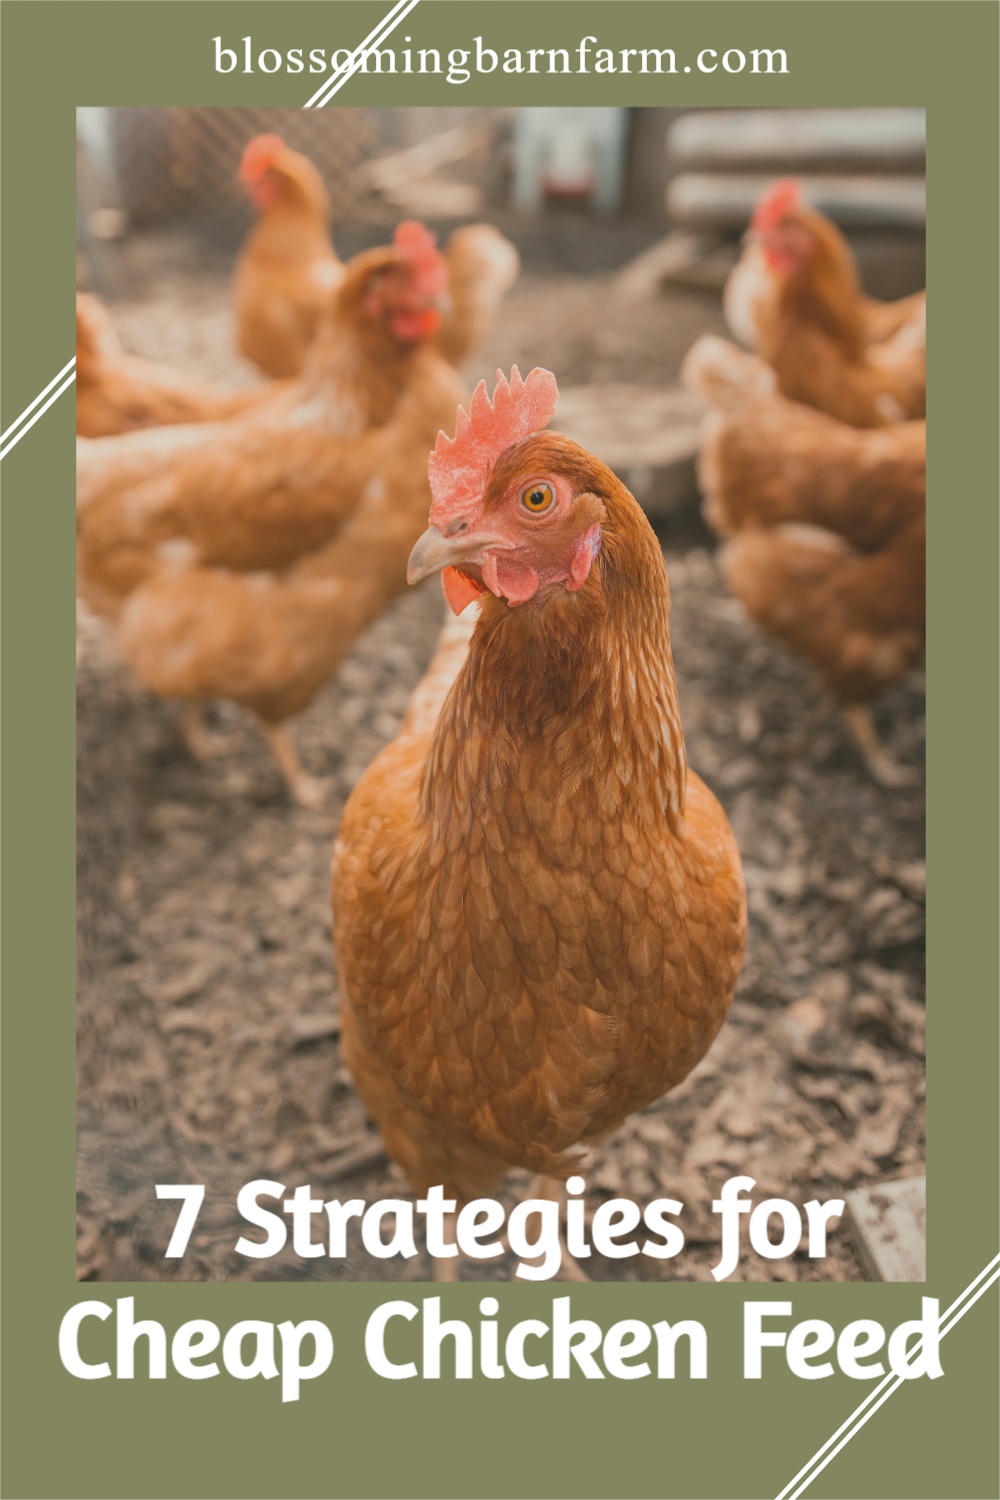 7 Strategies for Cheap Chicken Feed, brown chicken standing on dirt